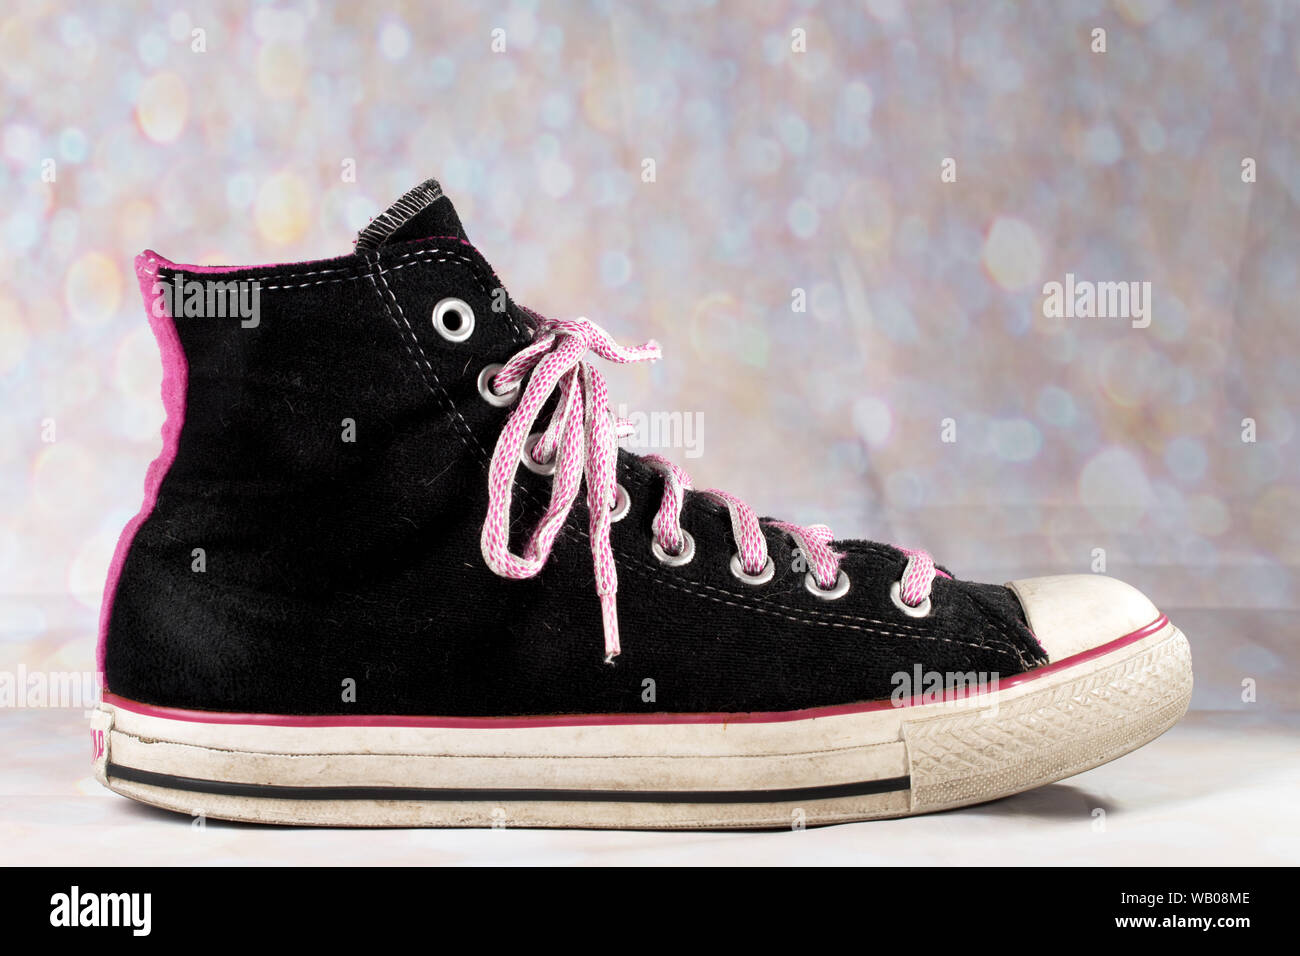 Pink and Black Converse Sneaker worn against a blurry background has pink  shoelaces Stock Photo - Alamy